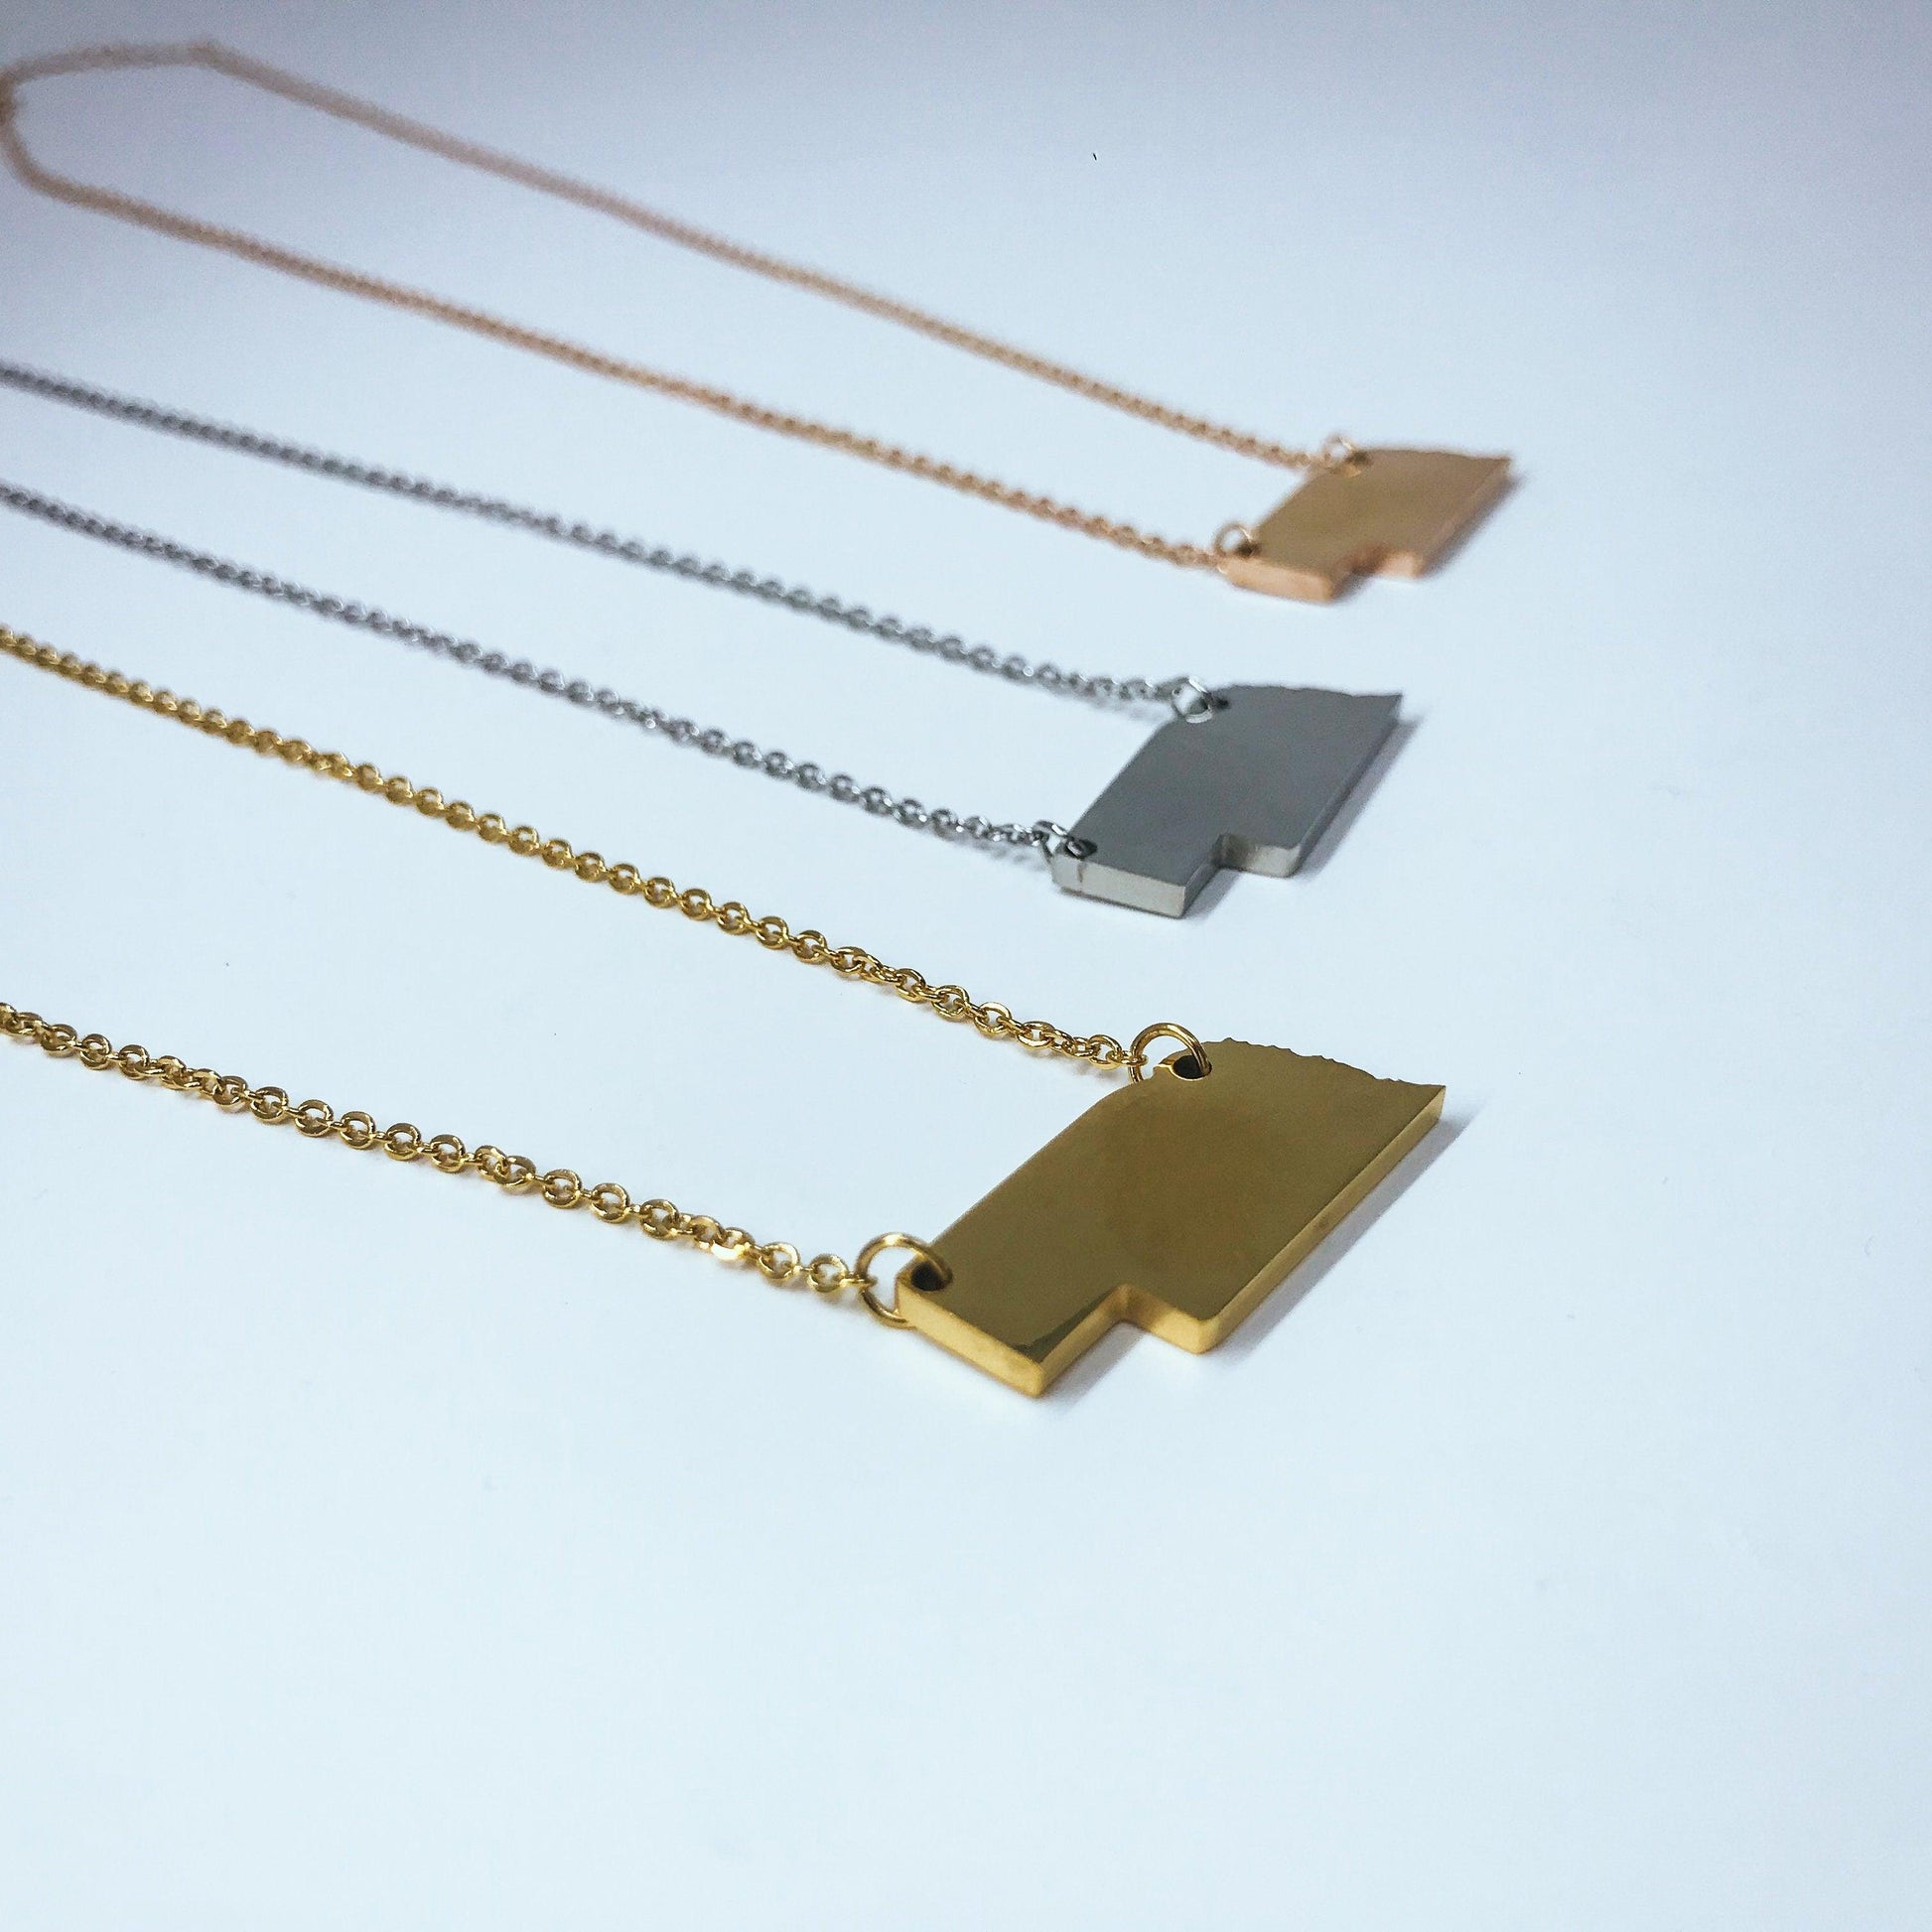 Nebraska State Silhouette Necklaces in 3 different colors: Gold, Silver & Rose Gold